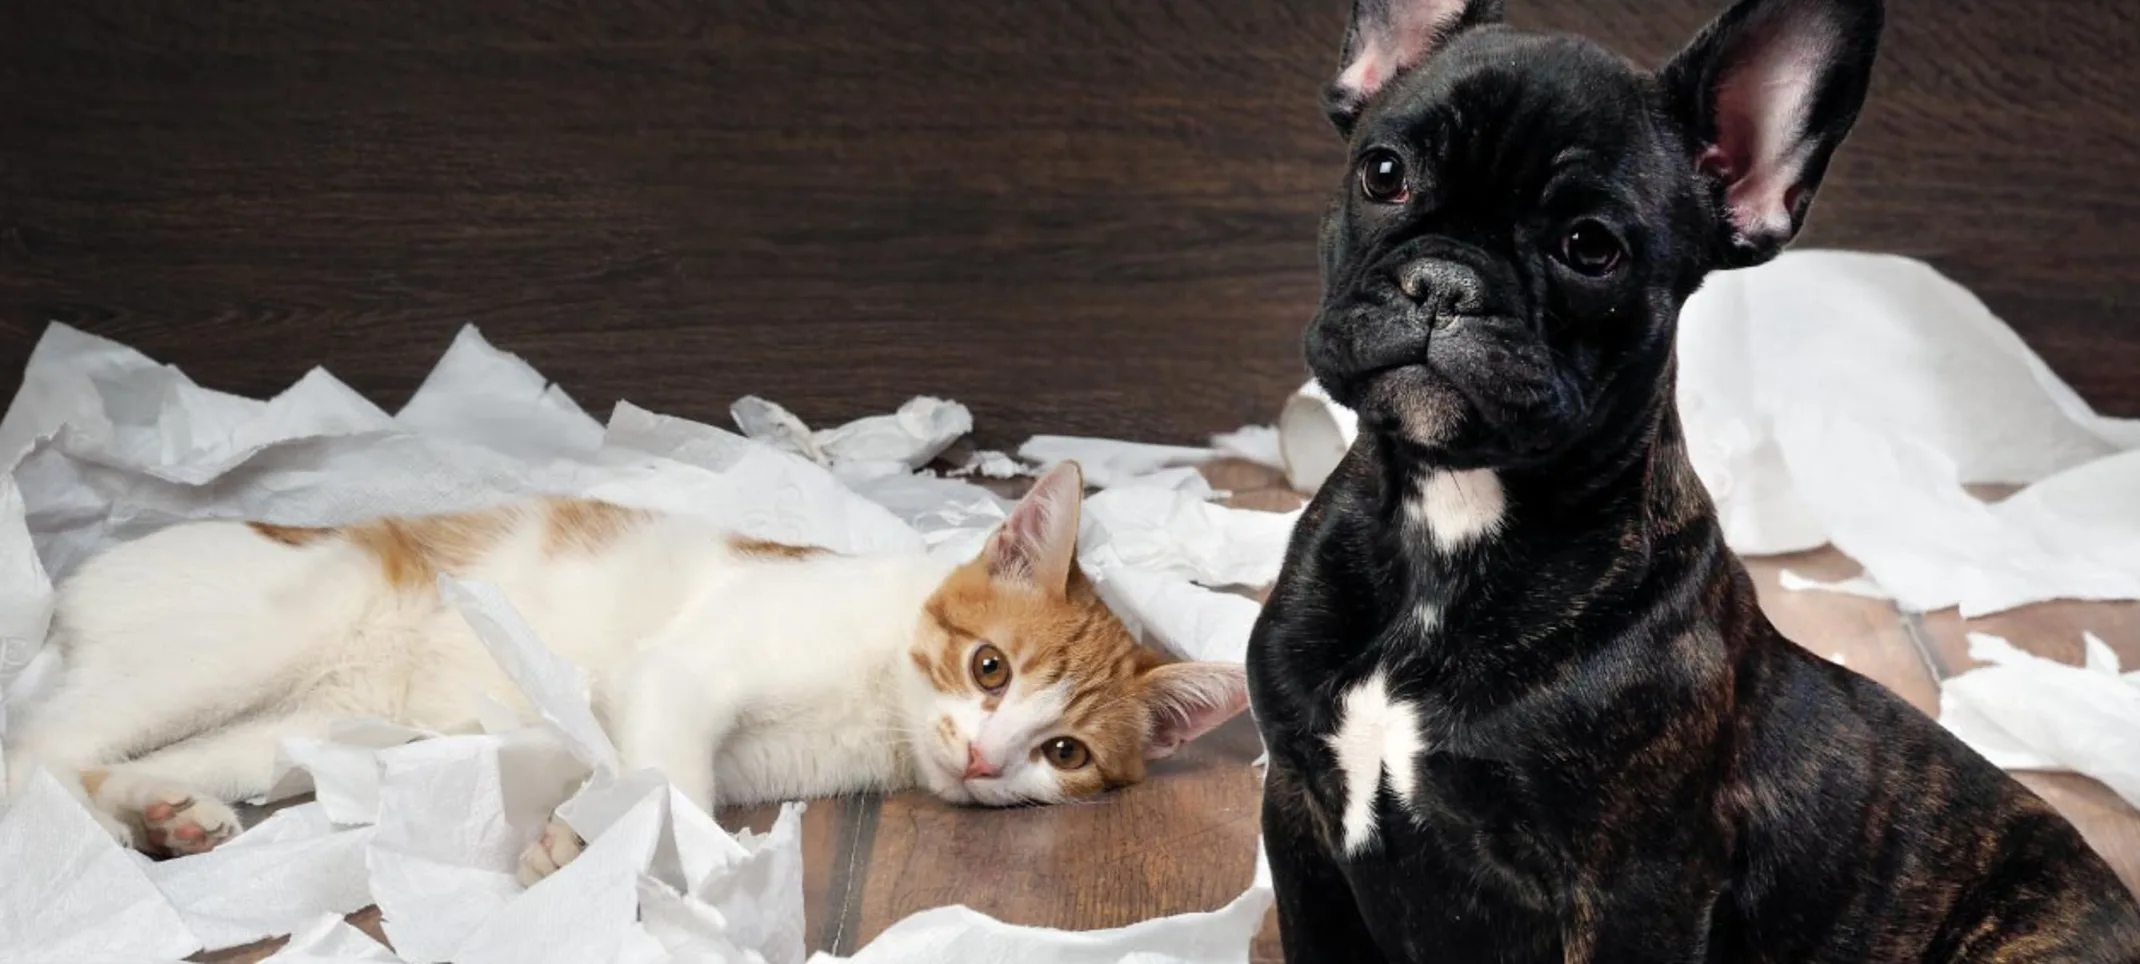 Dog and Cat destroy paper